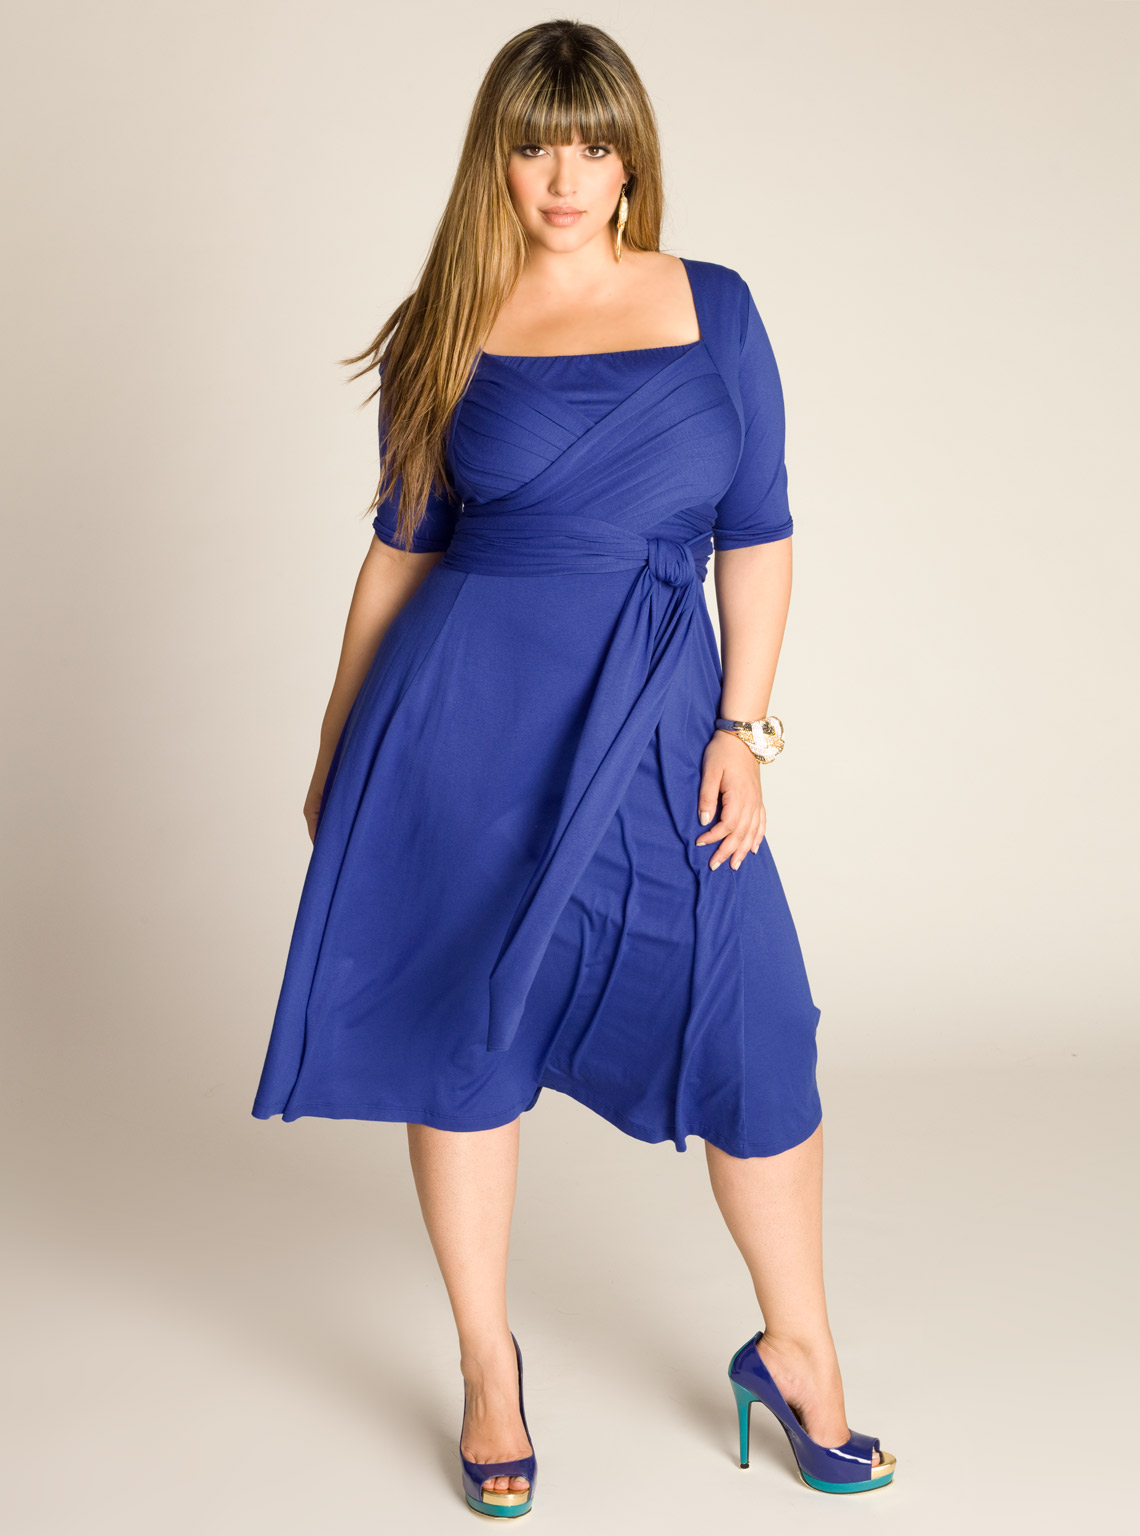 Plus Size Party Dresses | Dressed Up Girl